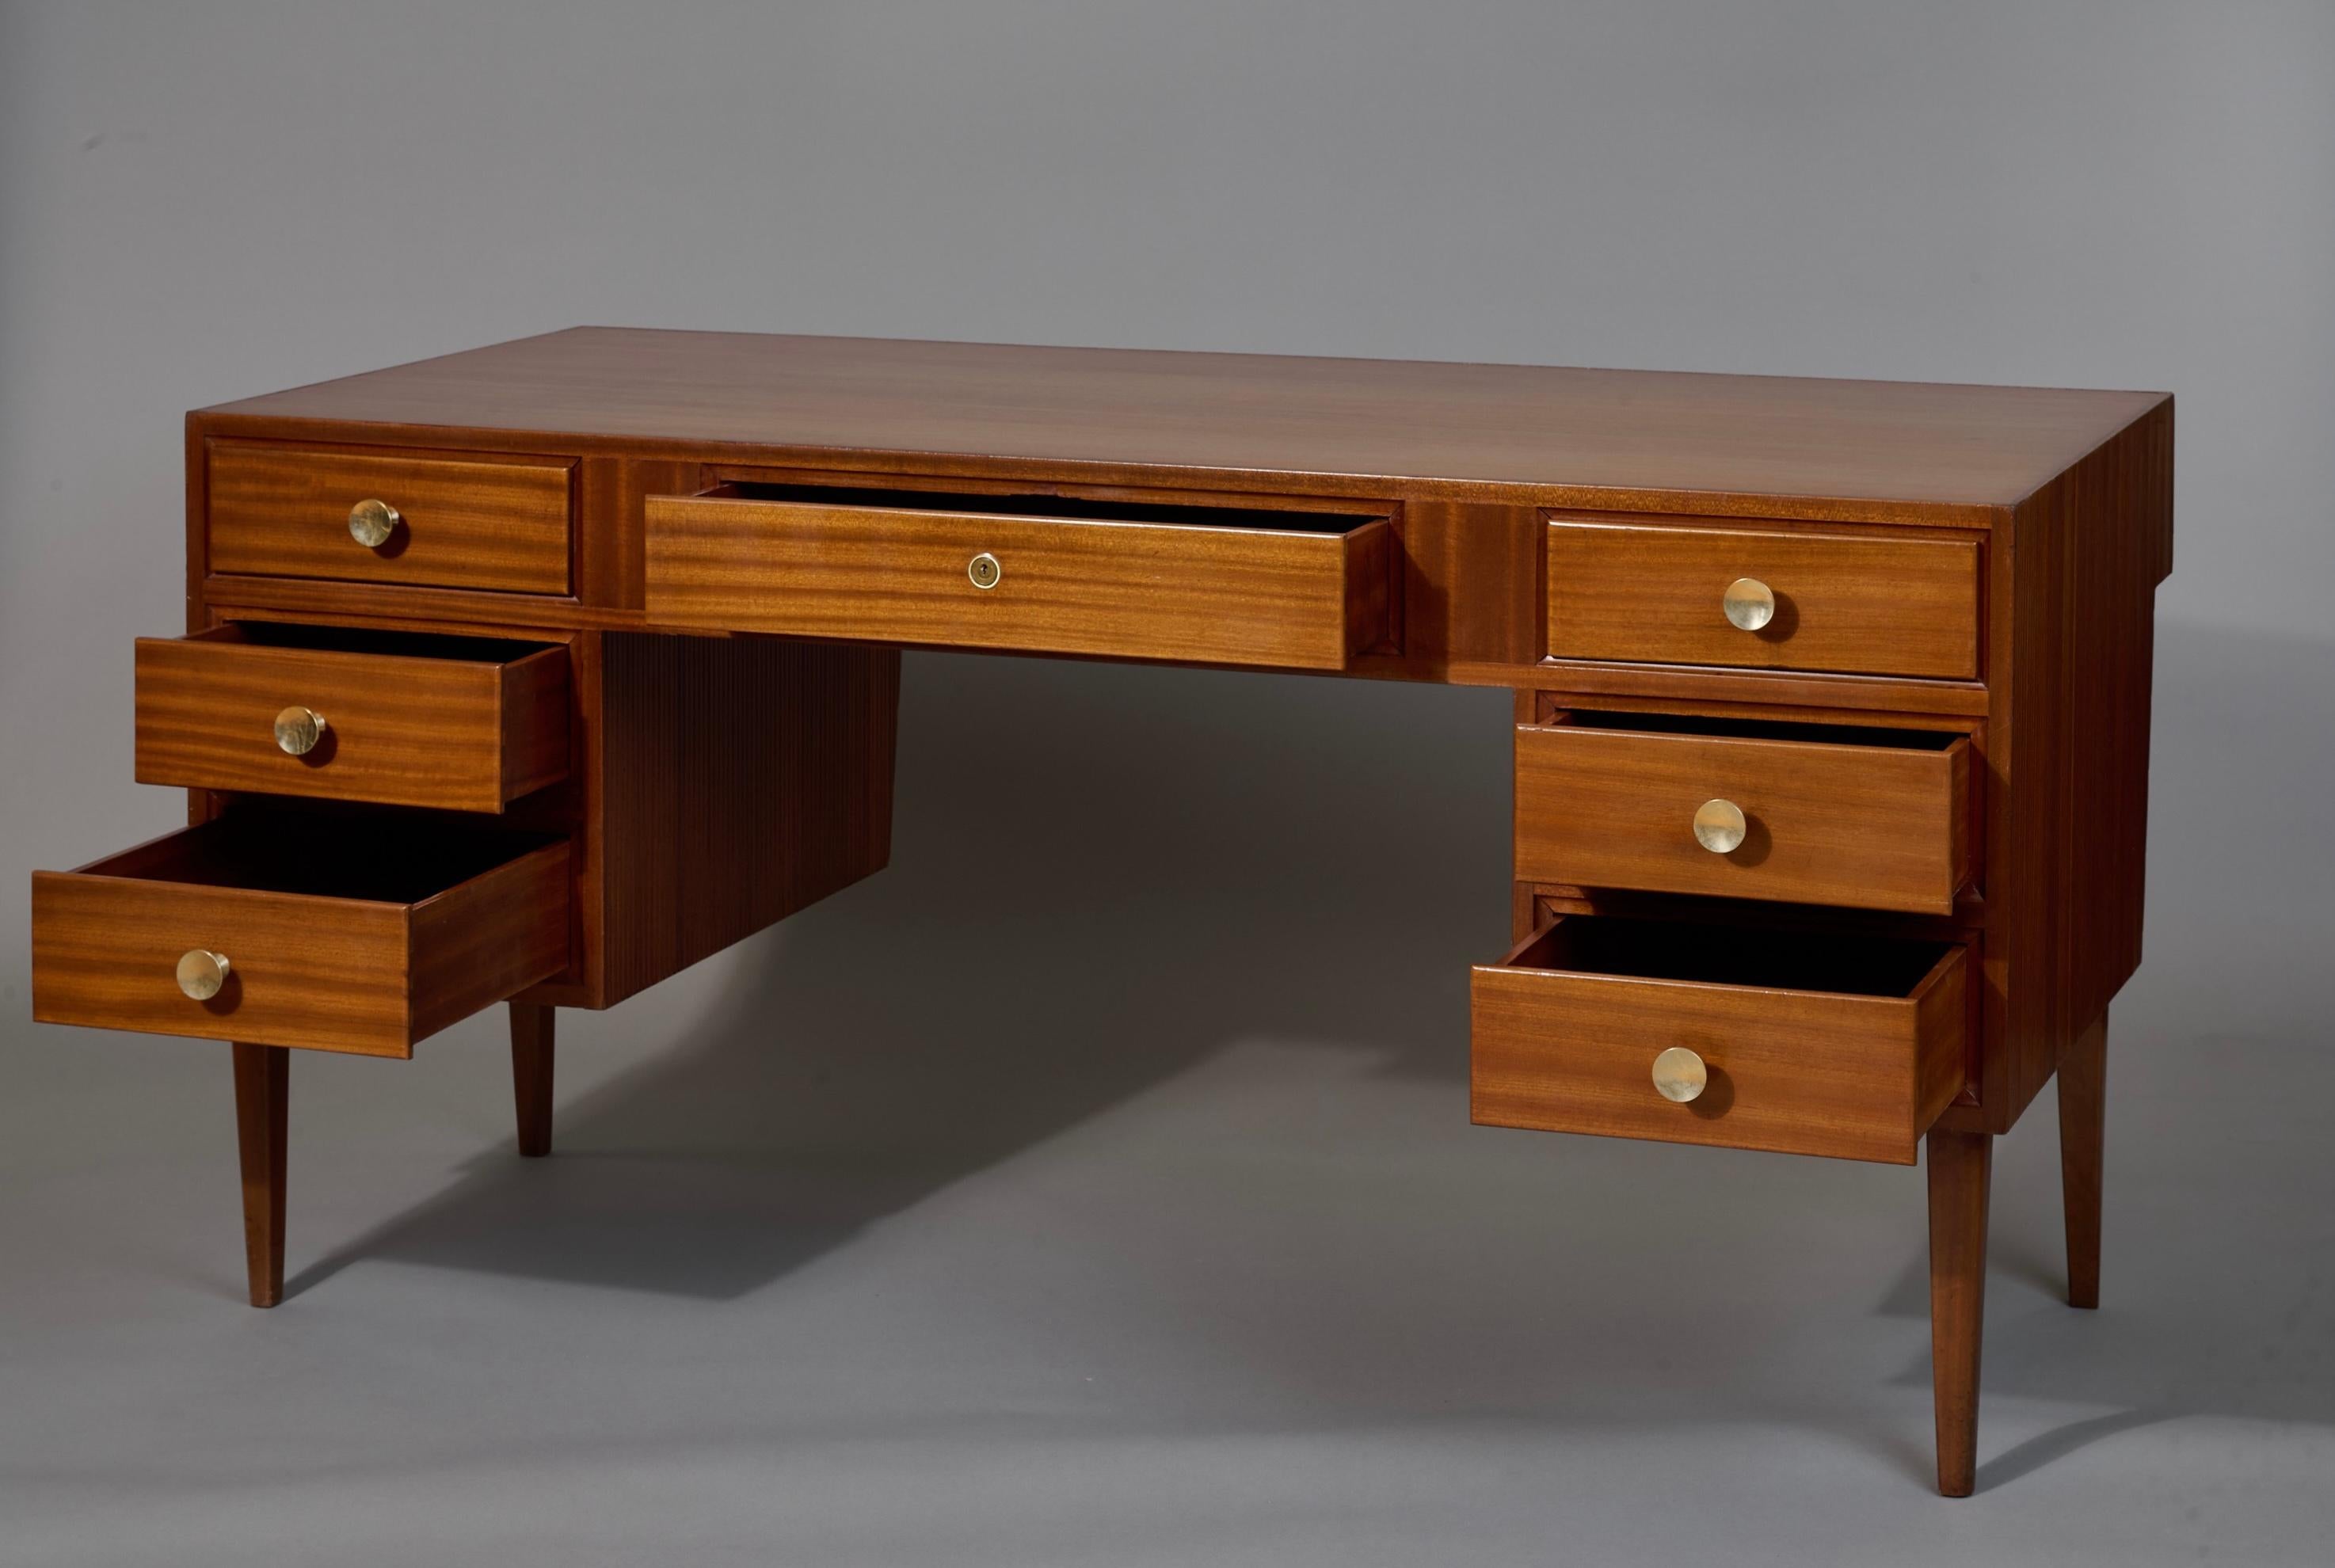 Italian Gio Ponti: Monumental Executive Desk in Reeded Walnut and Brass, Italy 1950s For Sale